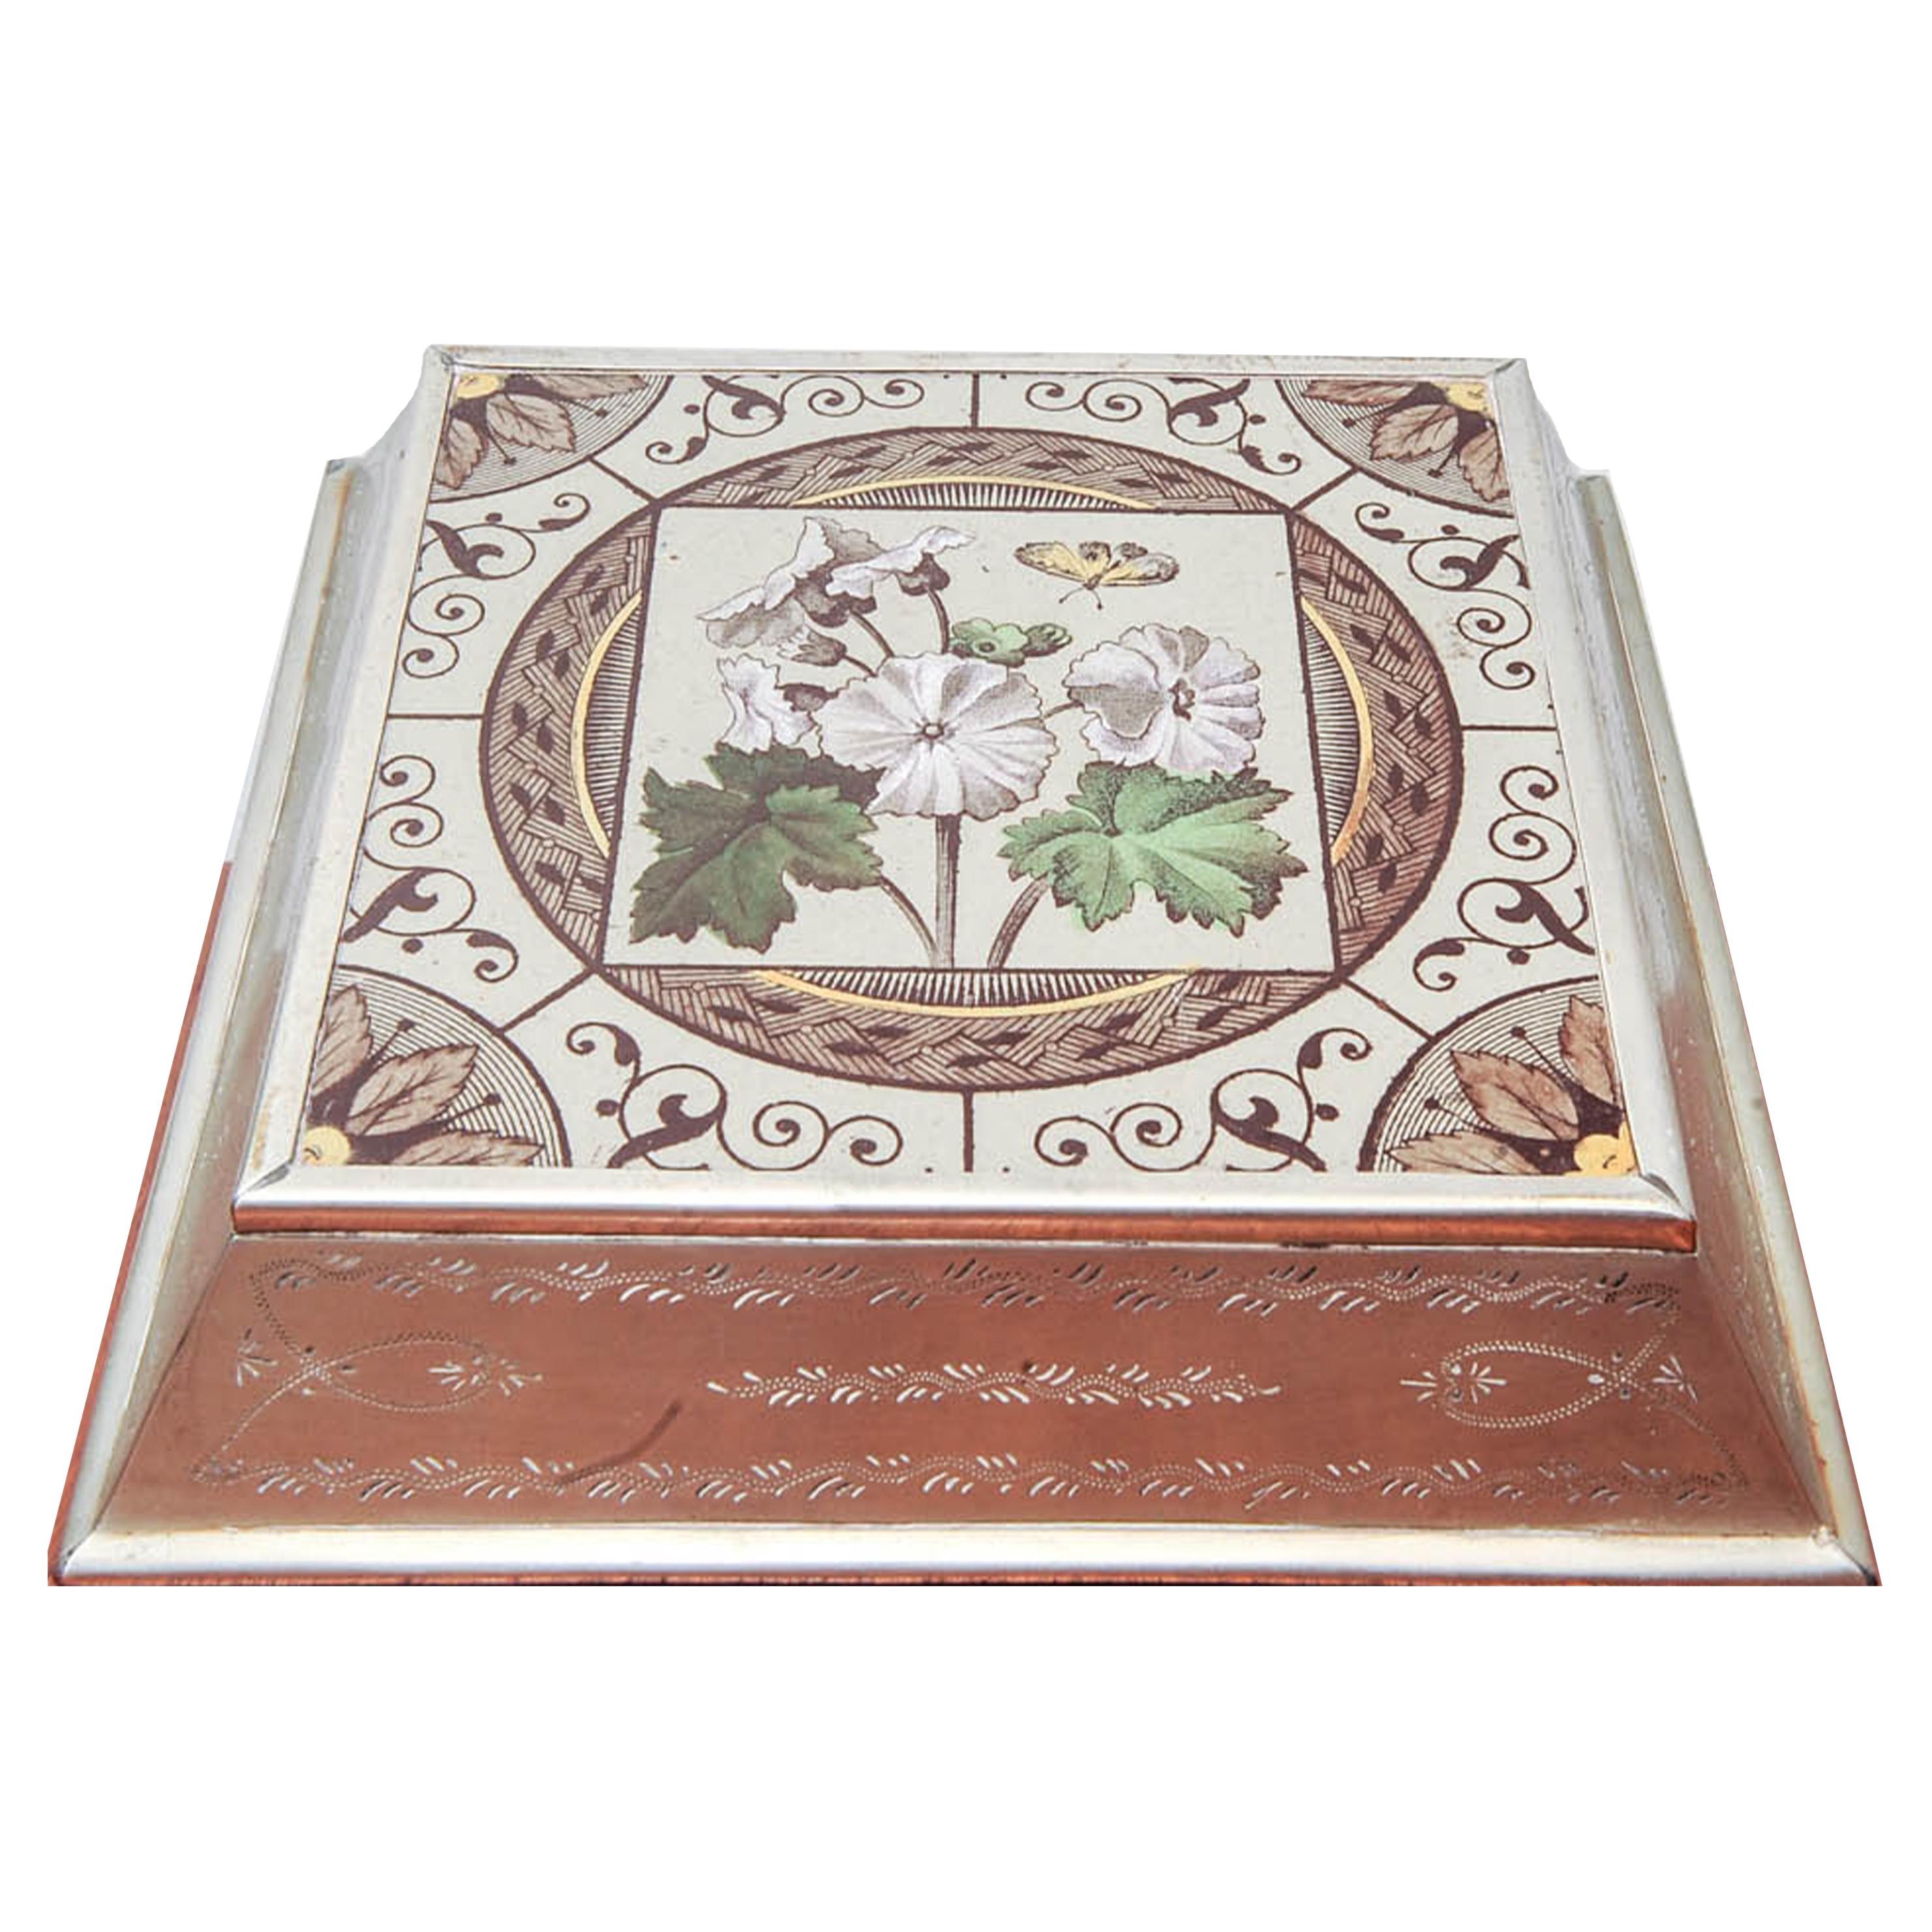 Liberty's of London Arts & Crafts Pot Stand With Decorative Botanical Etchings